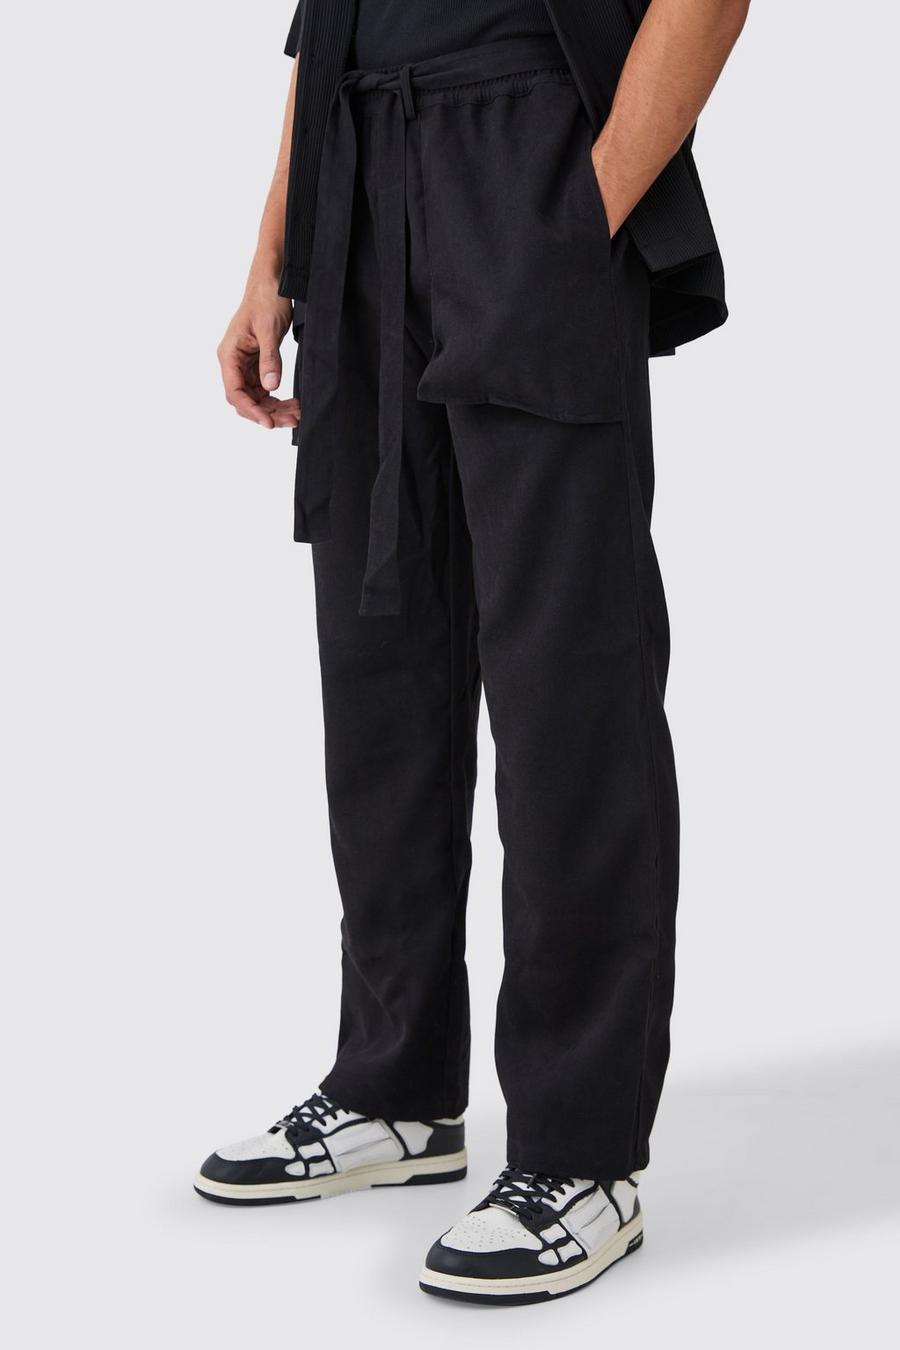 Black Elastic Waist Peached Relaxed Fit Pants